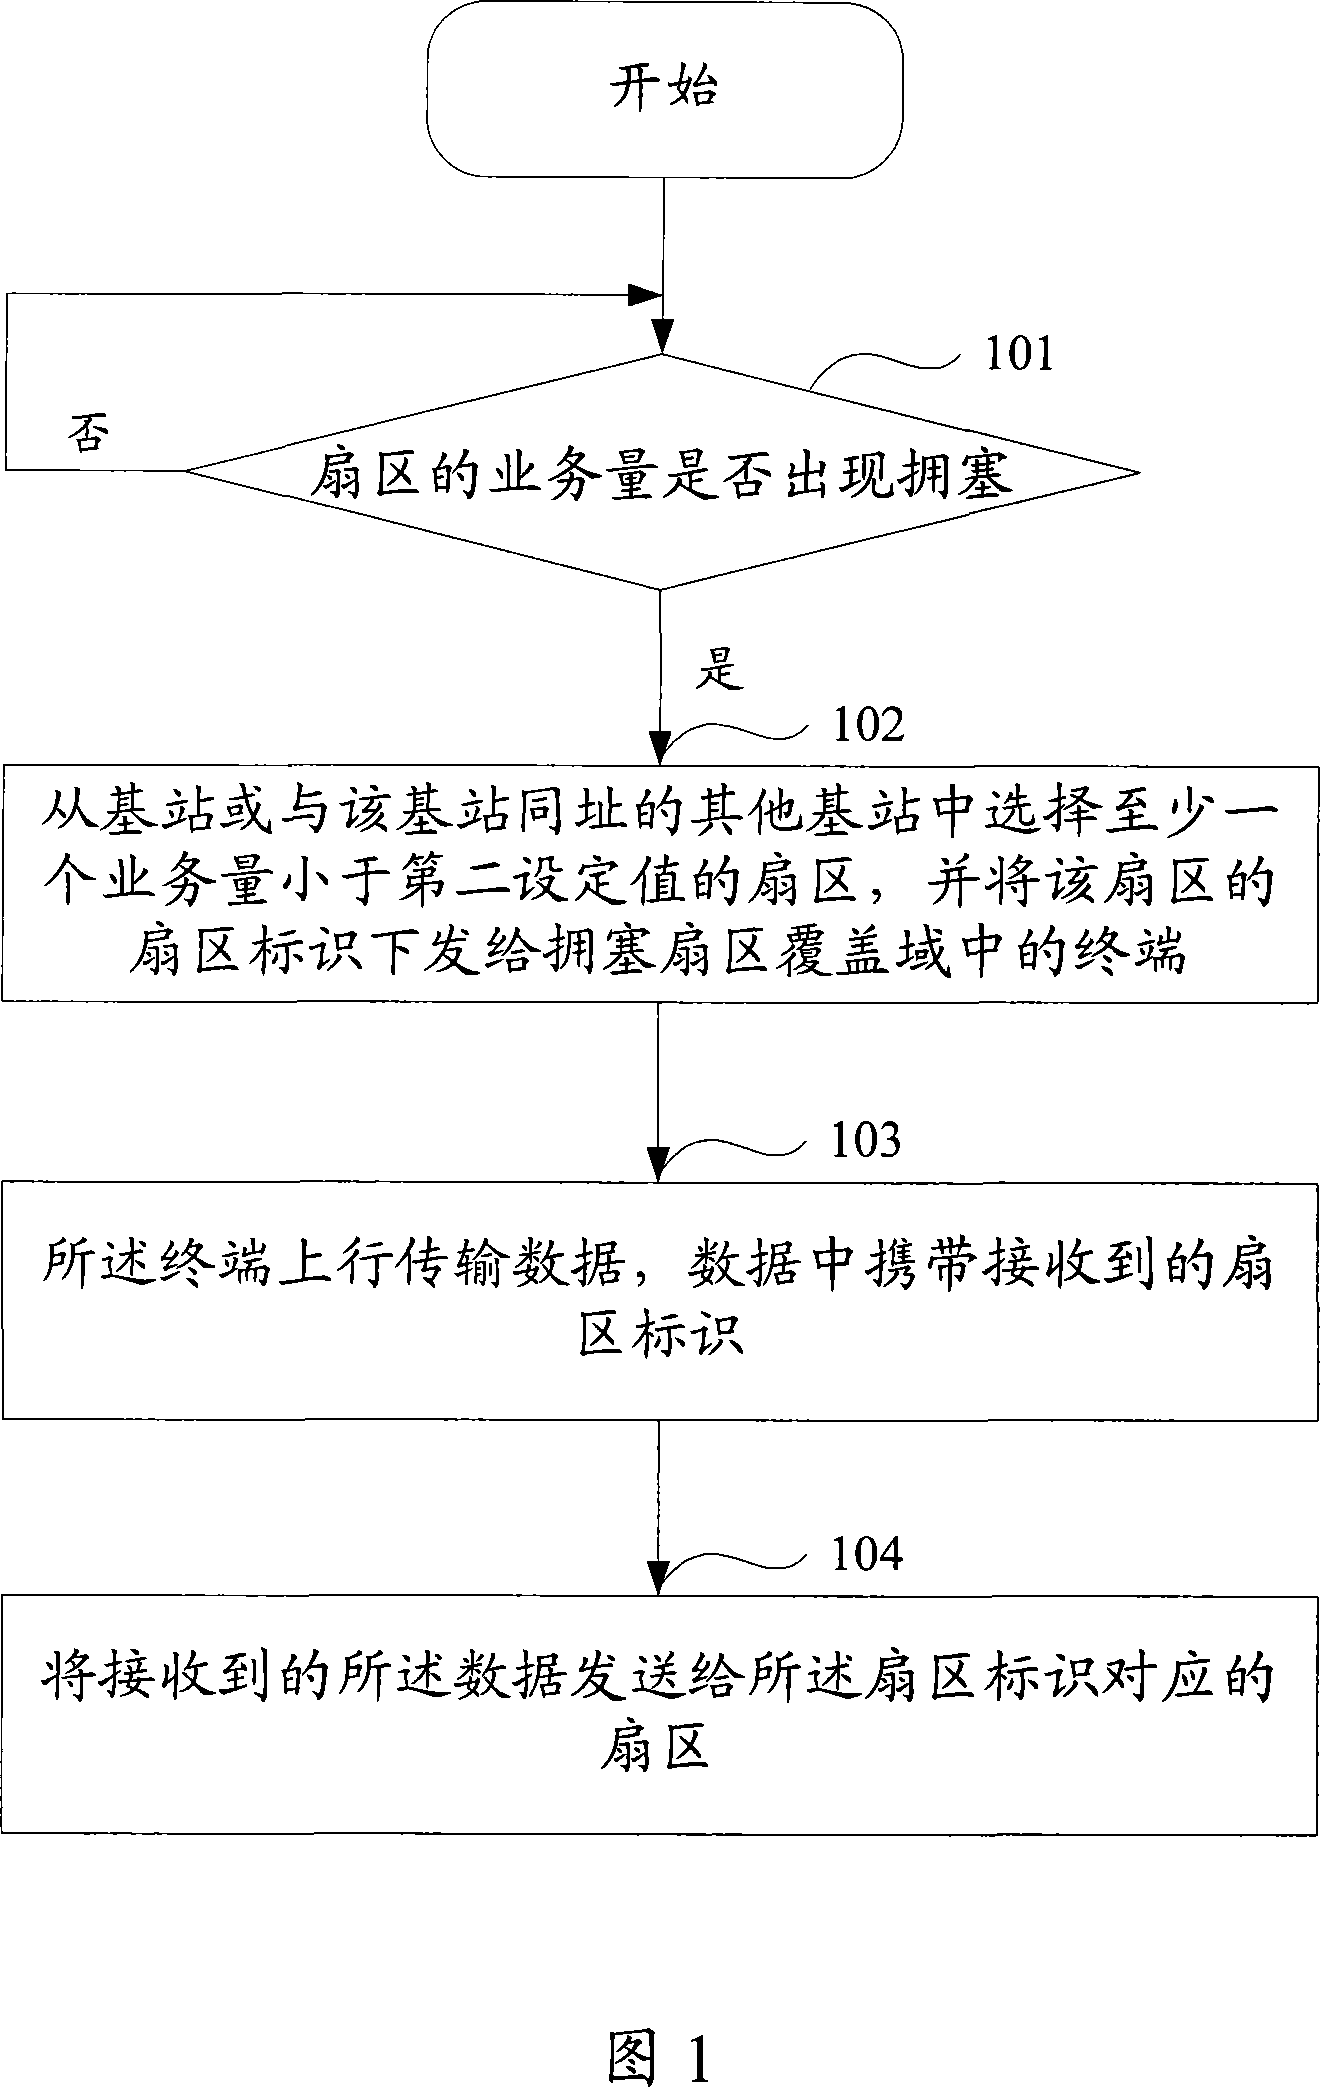 Method for enlarging local region wireless communication capacity, communication system and network subsystem